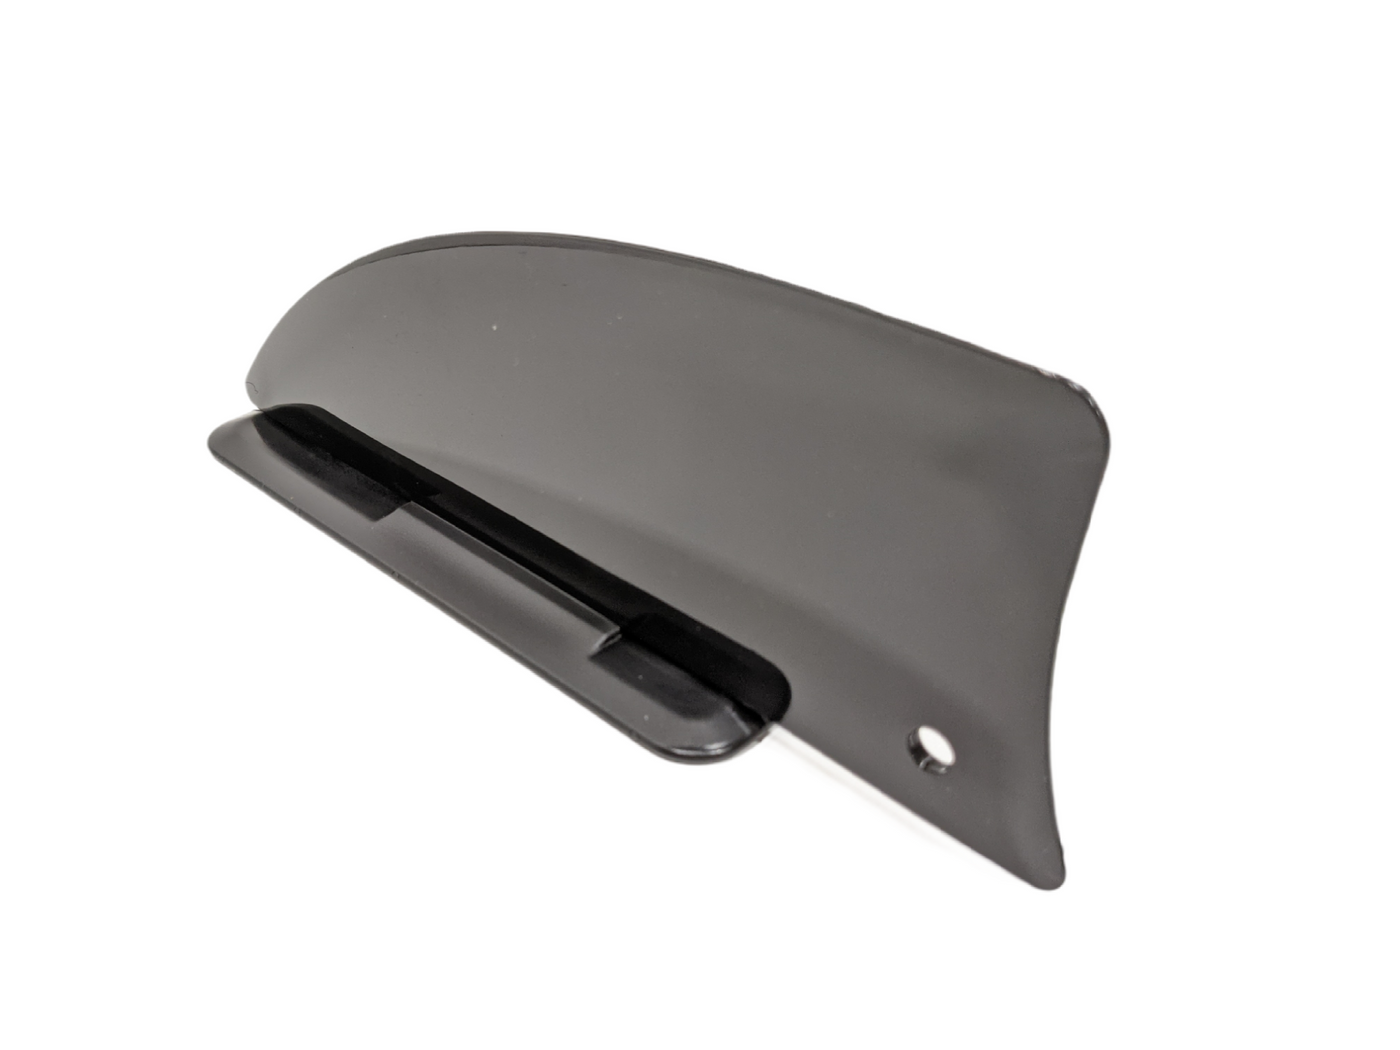 Keel fin (without patch)